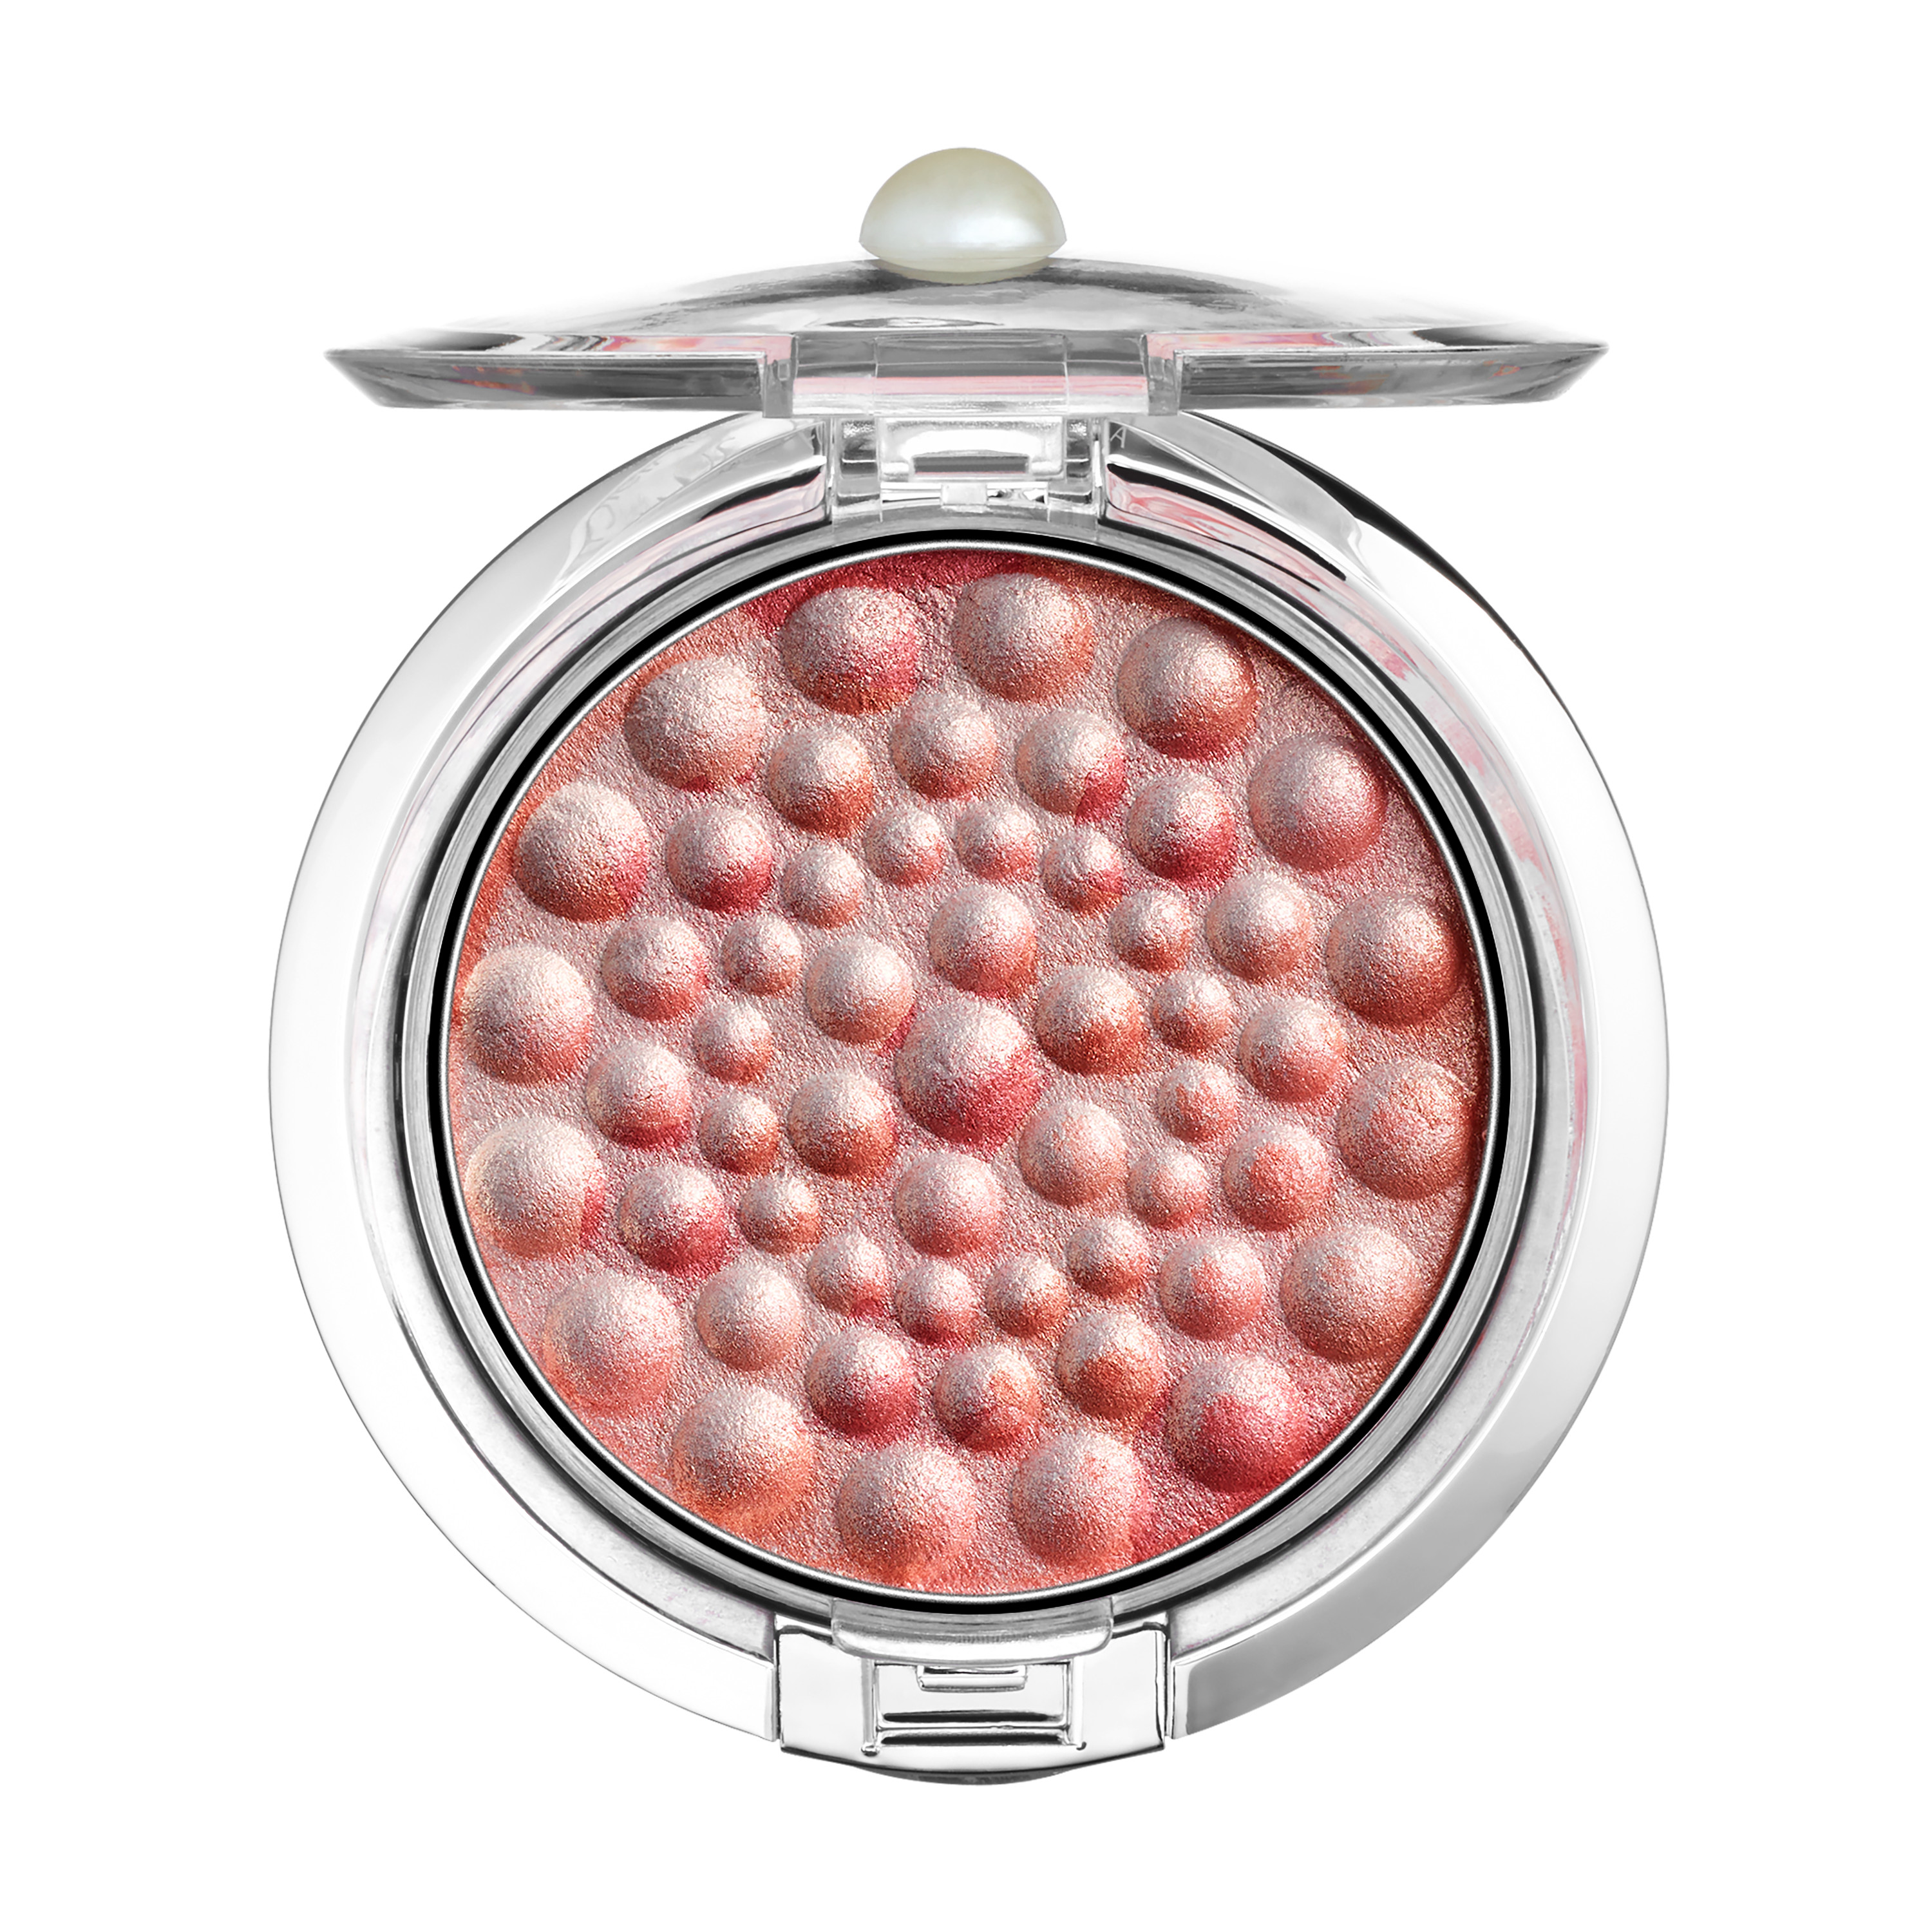 Physicians Formula Powder Palette® Mineral Glow Pearls Blush, Natural Pearl - image 1 of 6